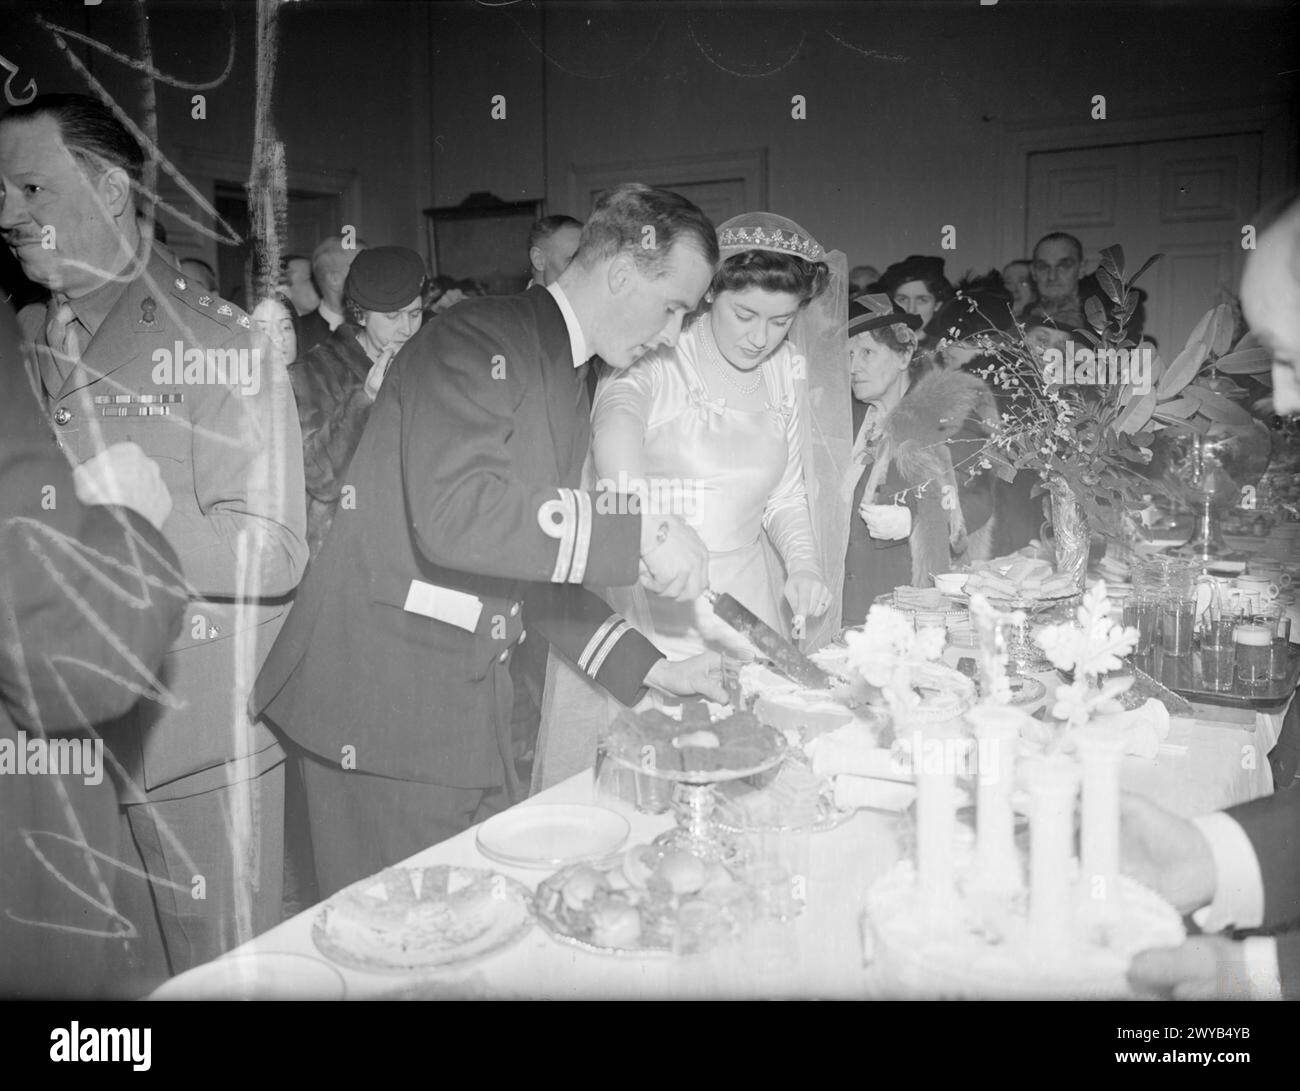 ADMIRAL'S SON WEDS EARL'S DAUGHTER. 10 FEBRUARY 1944, ADMIRALTY HOUSE. AT THE RECEPTION ATTENDED BY PRINCESS ELIZABETH AND PRINCESS MARGARET, WHICH FOLLOWED THE WEDDING AT WESTMINSTER ABBEY OF LIEUTENANT CHRISTOPHER WAKE-WALKER, RN, SON OF VICE ADMIRAL SIR FREDERICK AND LADY WAKE-WALKER, AND THIRD OFFICER LADY ANNE SPENCER, WRNS, DAUGHTER OF EARL AND COUNTESS SPENCER. - The bride and groom cutting the cake. , Wake-Walker, Christopher Baldwin Hughes, Spencer, Anne Stock Photo